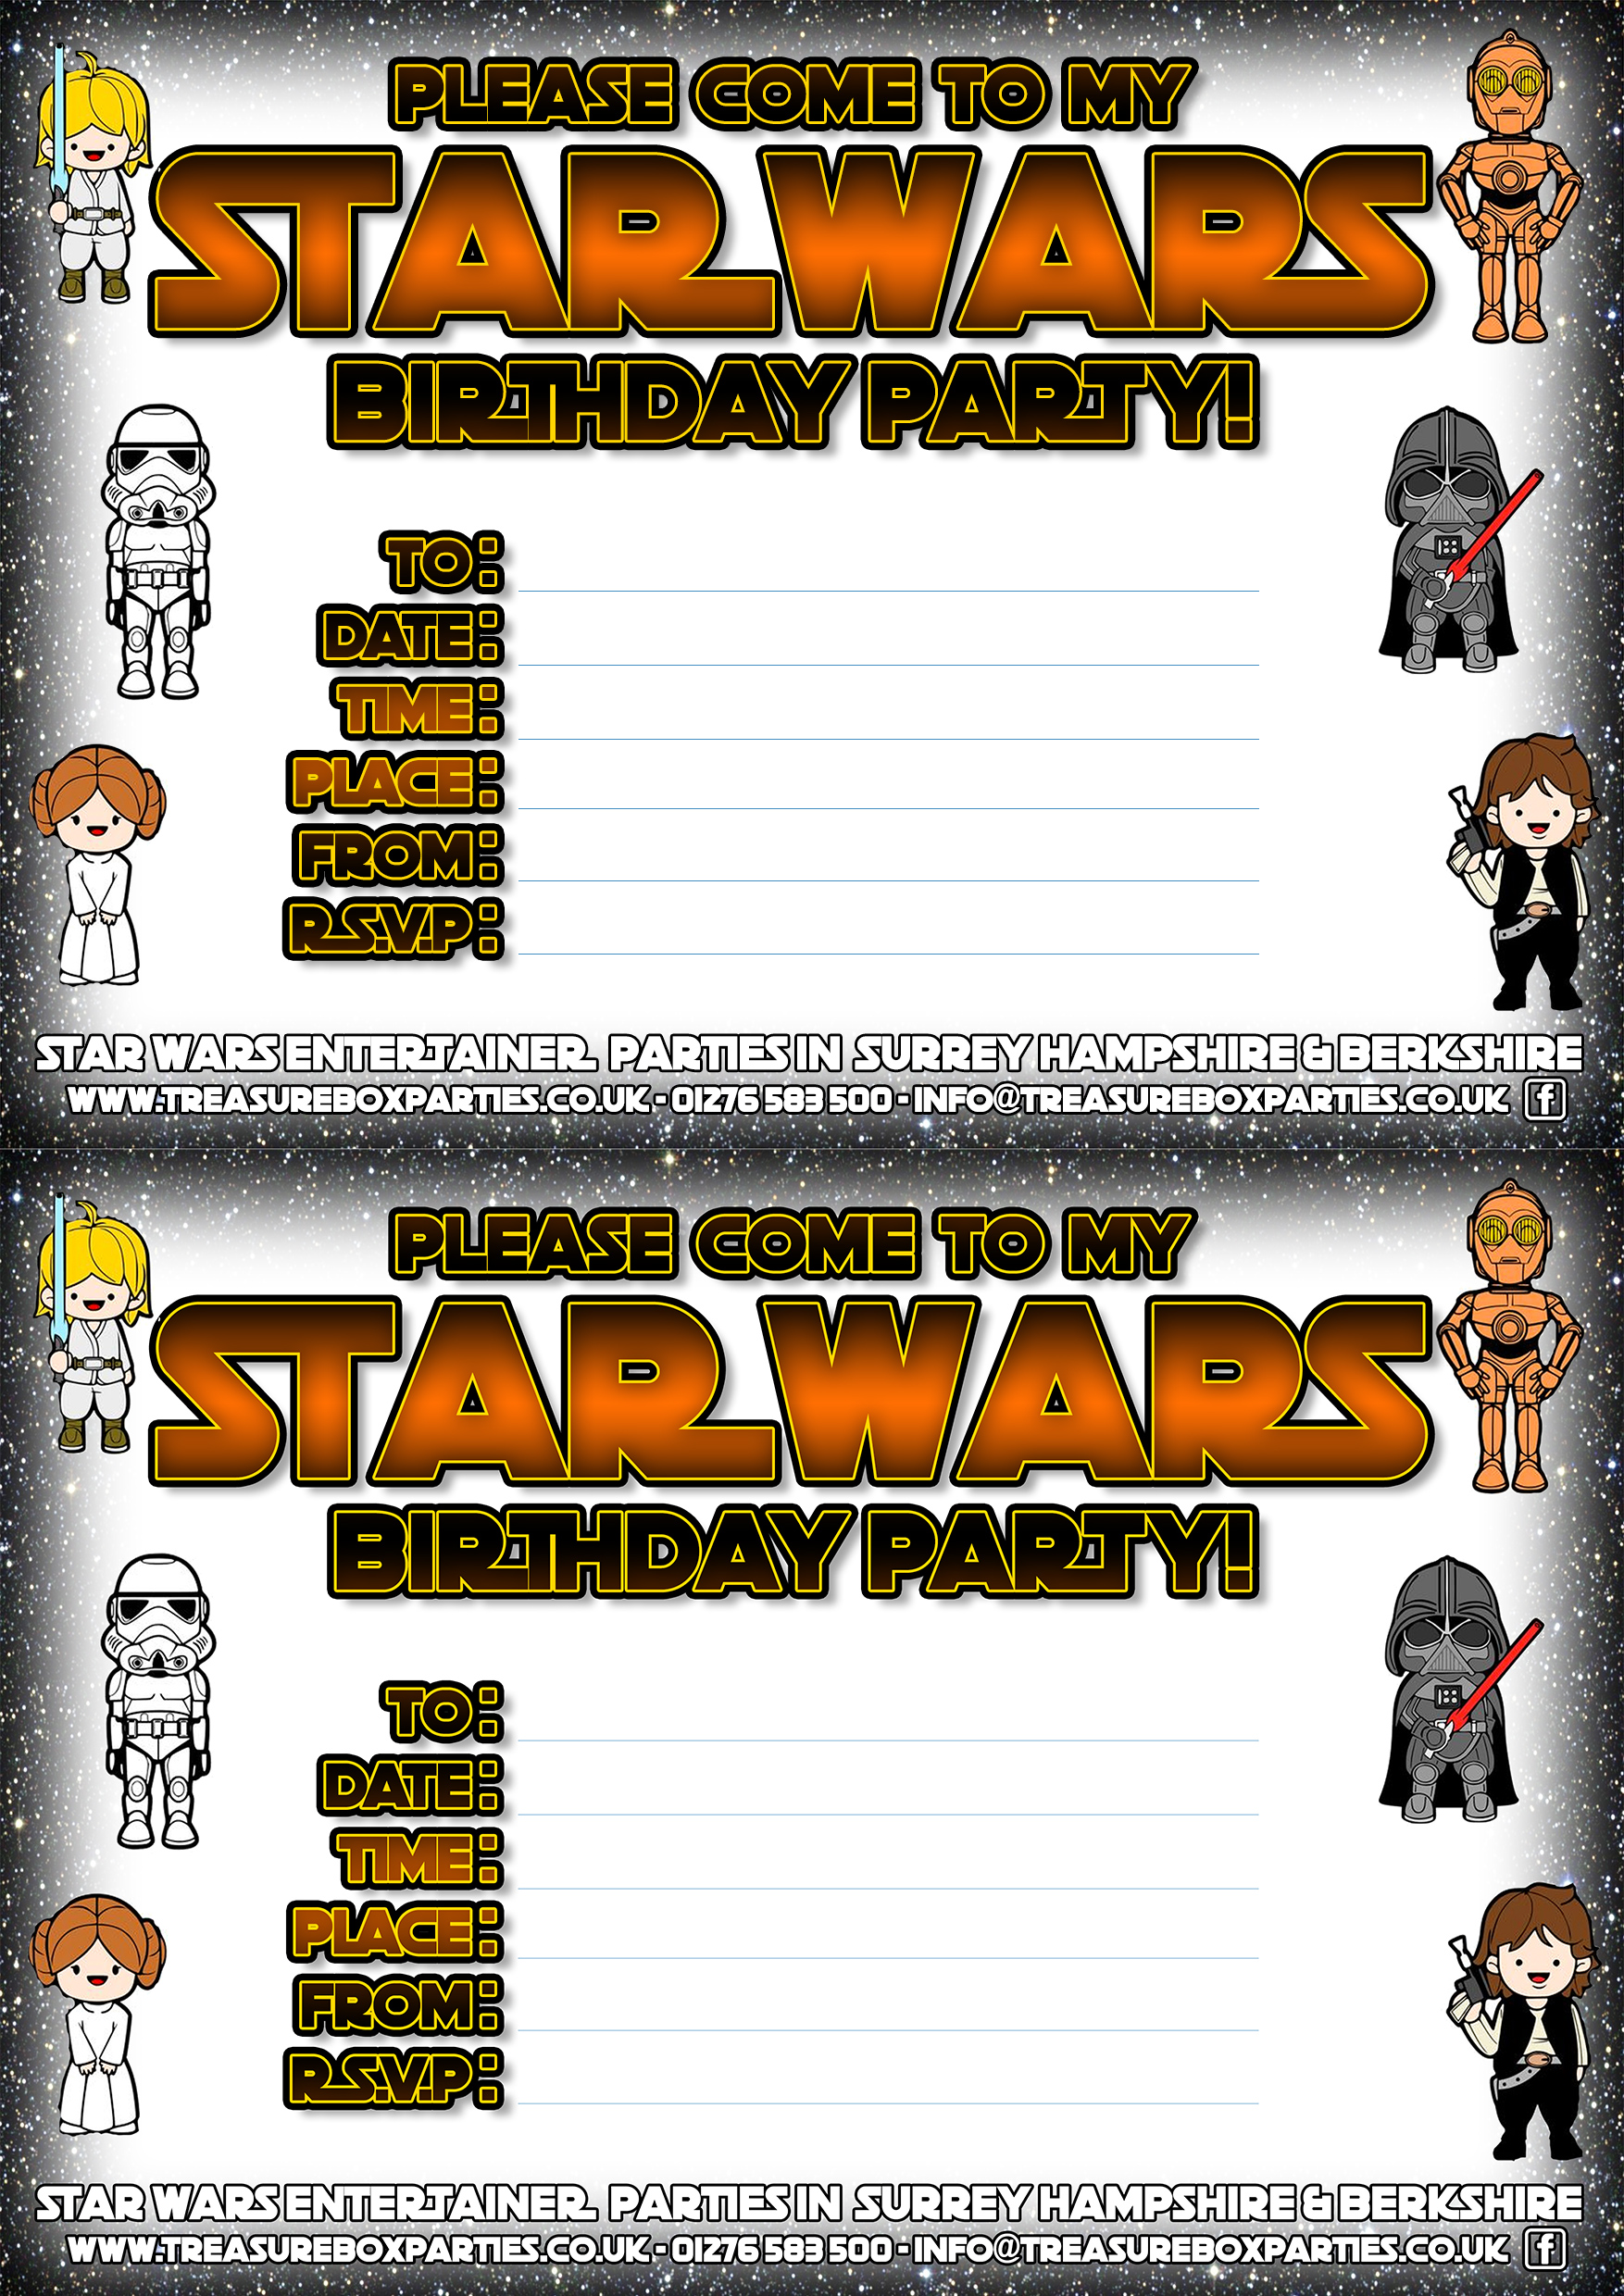 Star Wars Birthday Party Invitations Template from www.treasureboxparties.co.uk